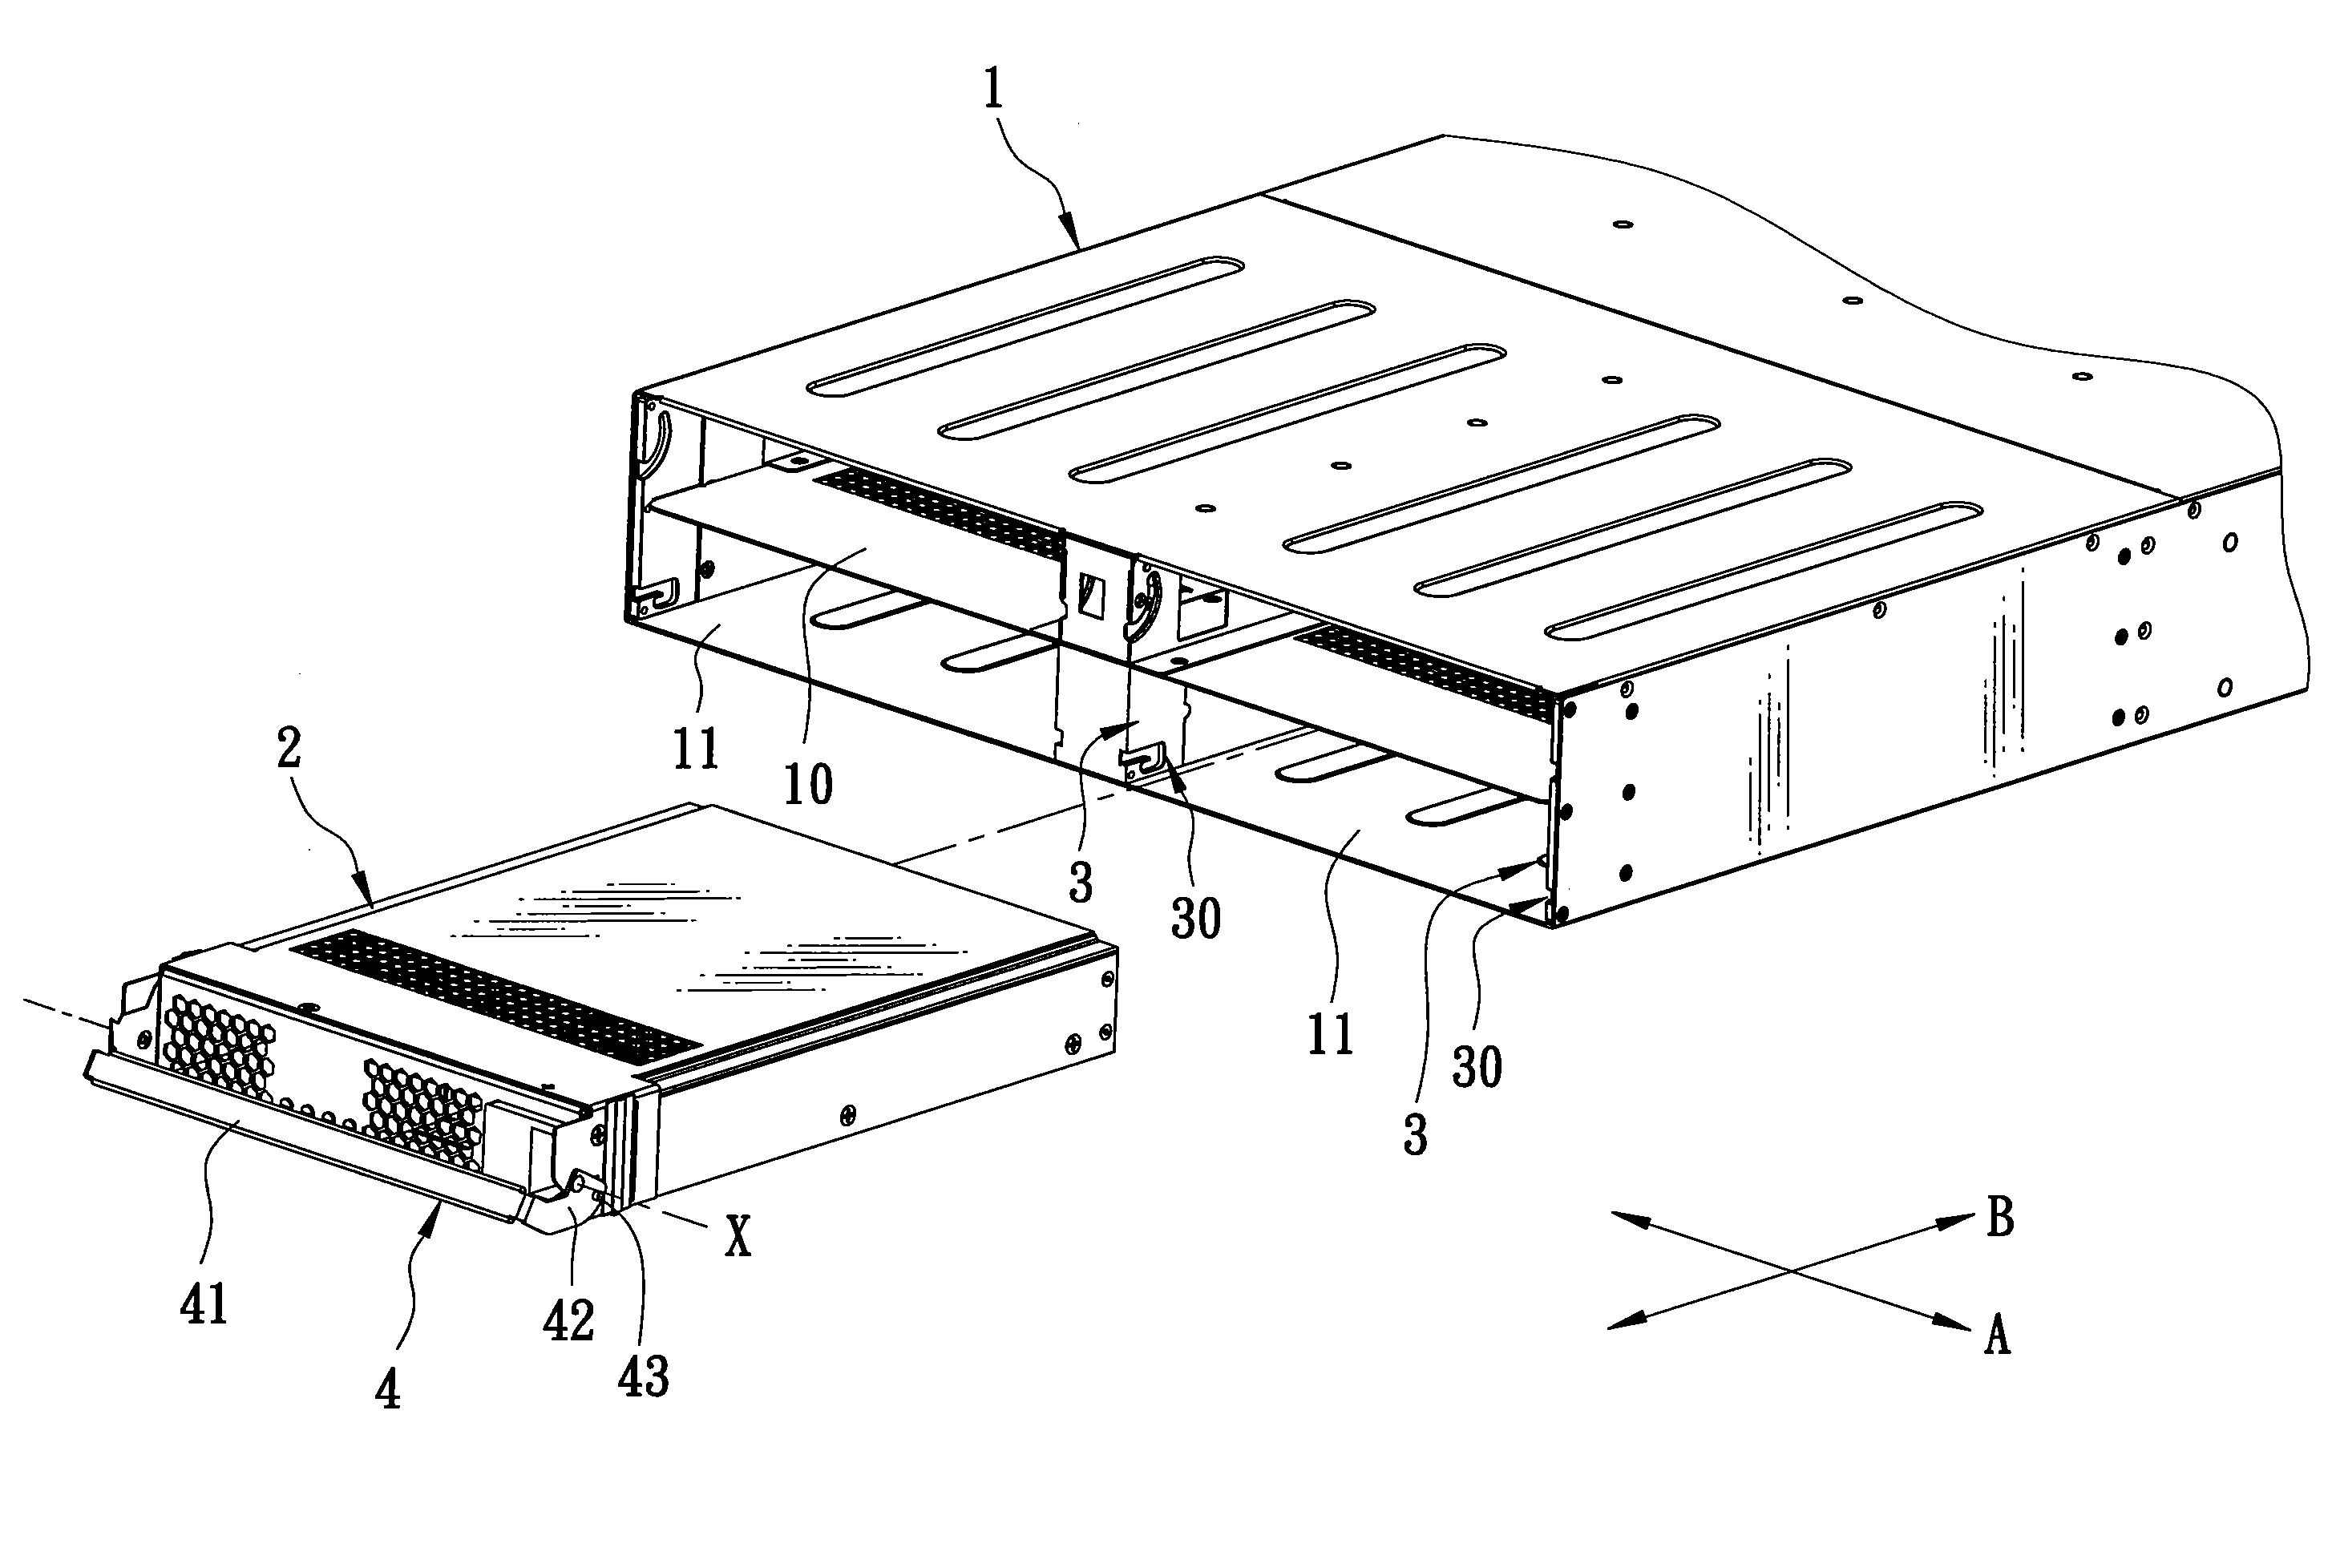 Positioning device adapted for positioning a detachable module in a housing